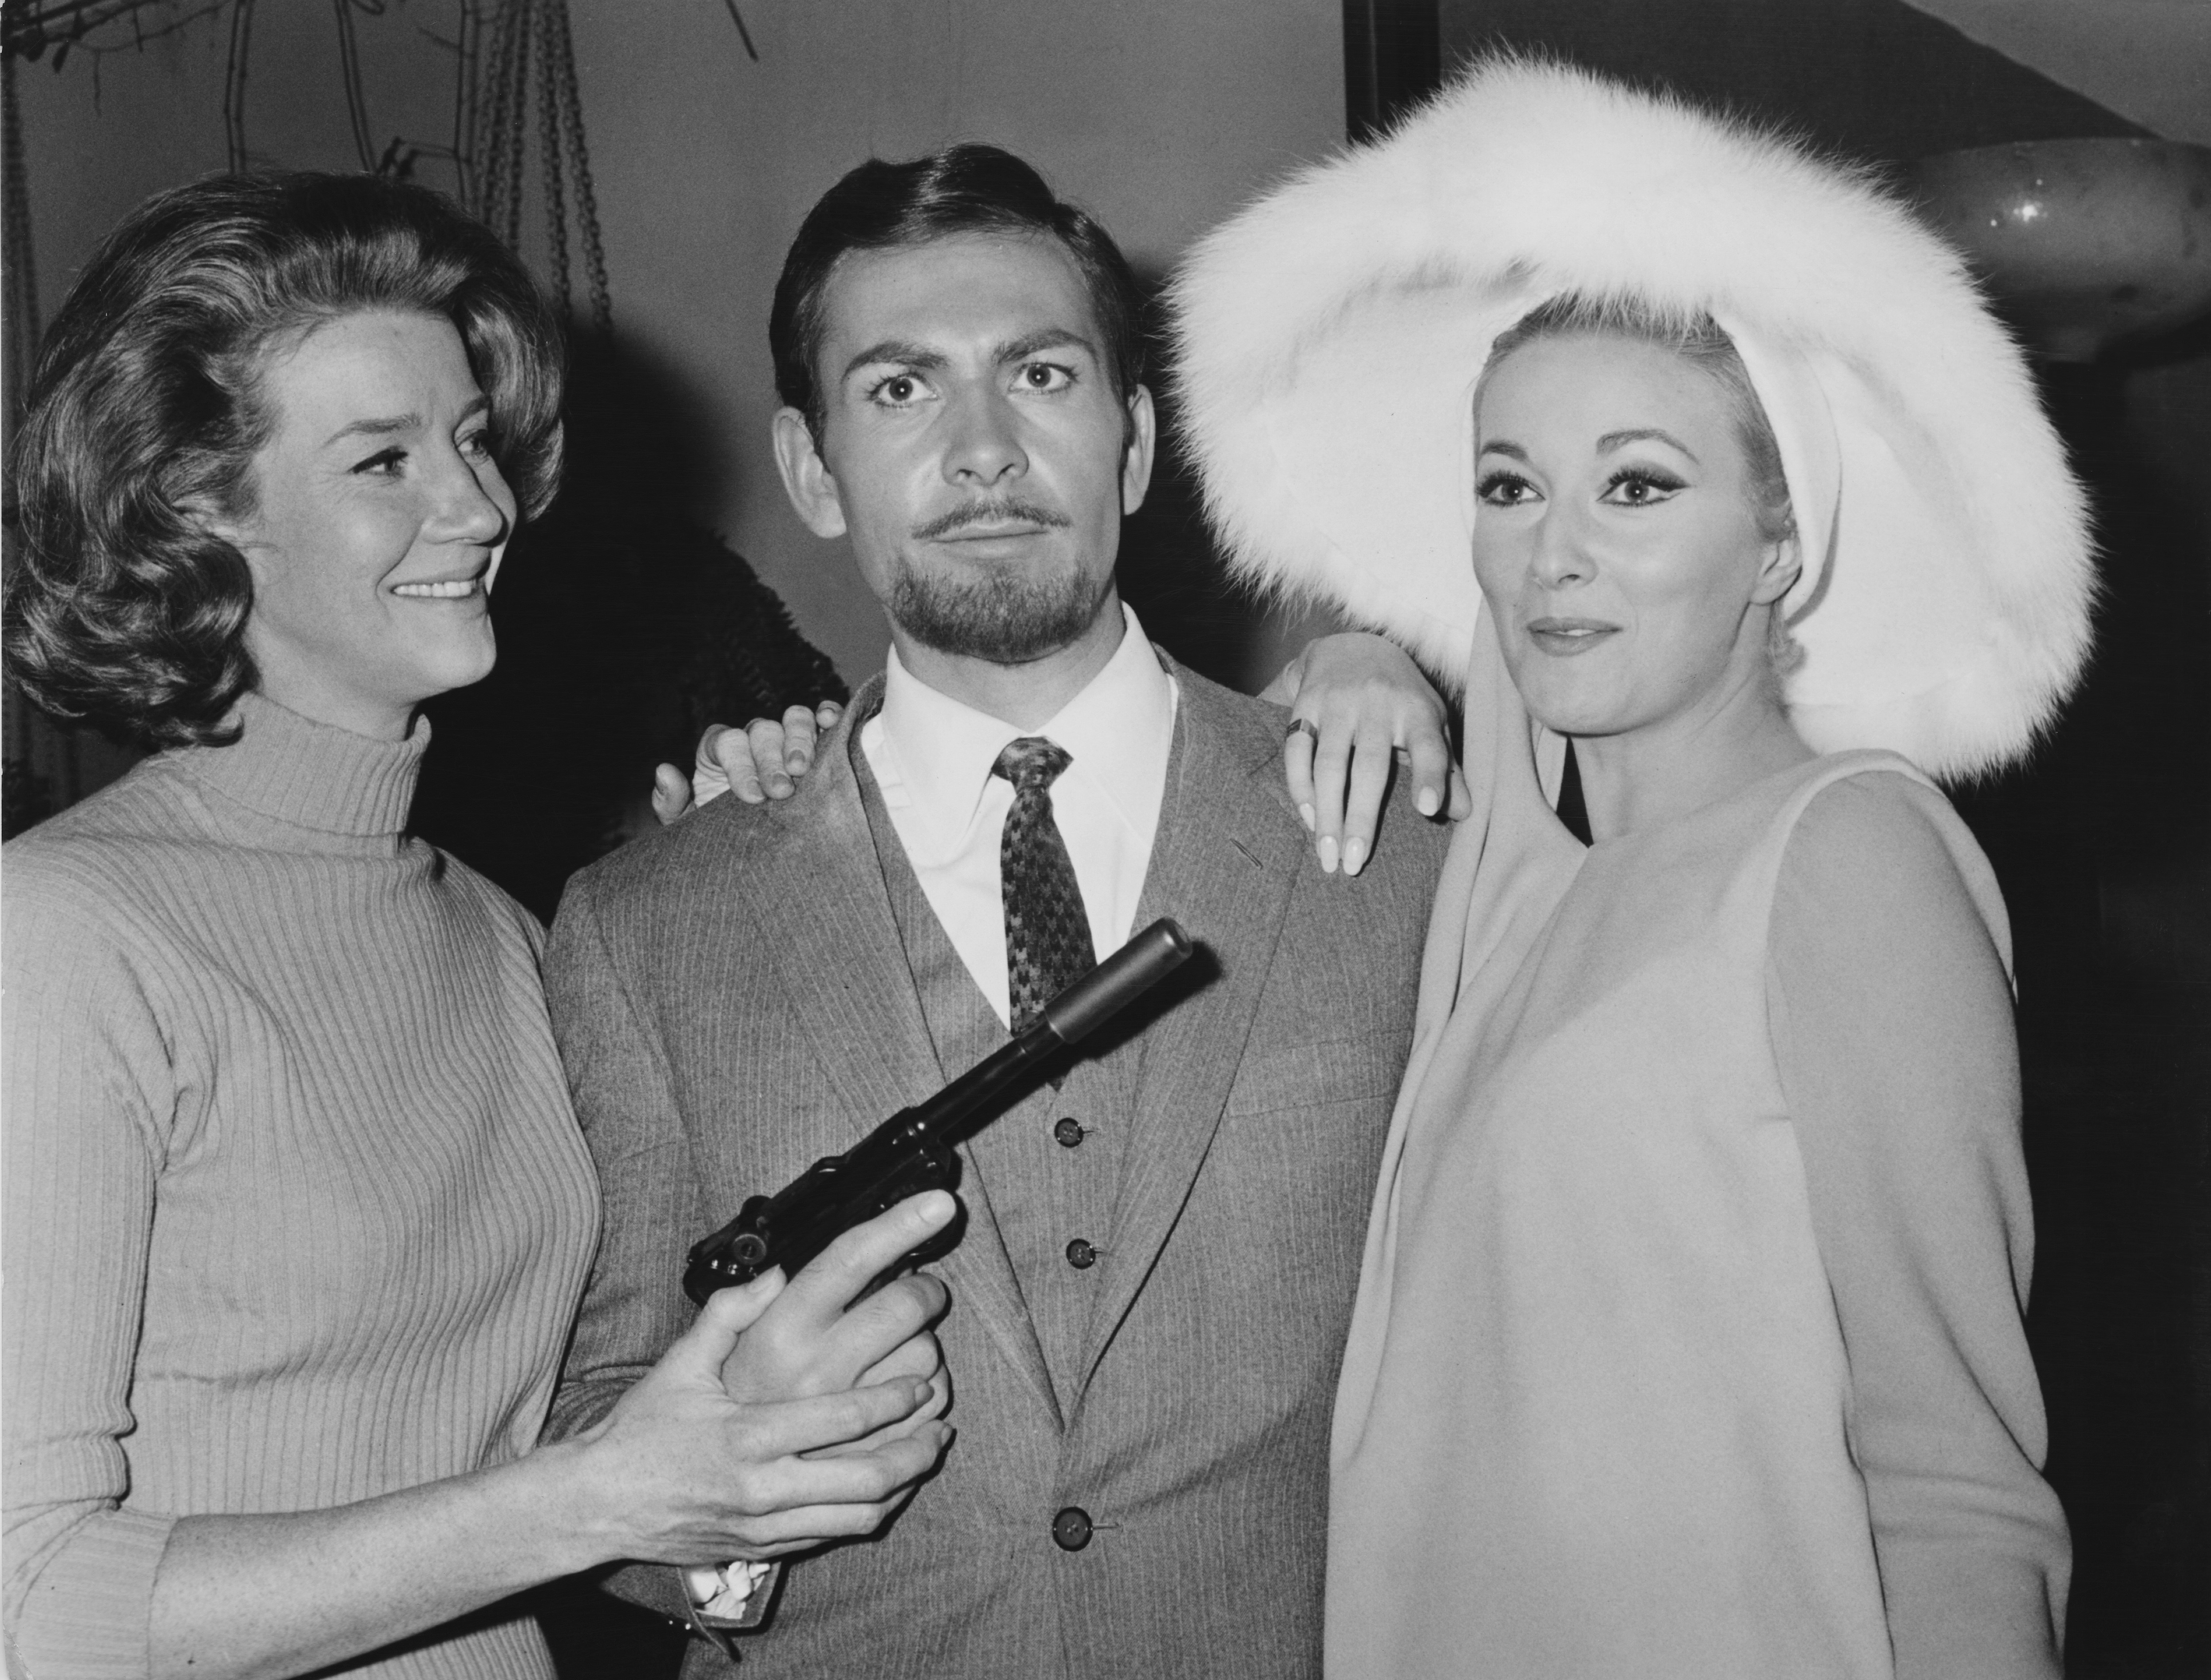 Actor Neil Connery, the brother of James Bond star Sean Connery, poses with actresses Lois Maxwell (left) and Daniela Bianchi (right), at a press conference for Bond spoof Operation Kid Brother in Italy on November 25, 1966 (Keystone/Hulton Archive/Getty Images)